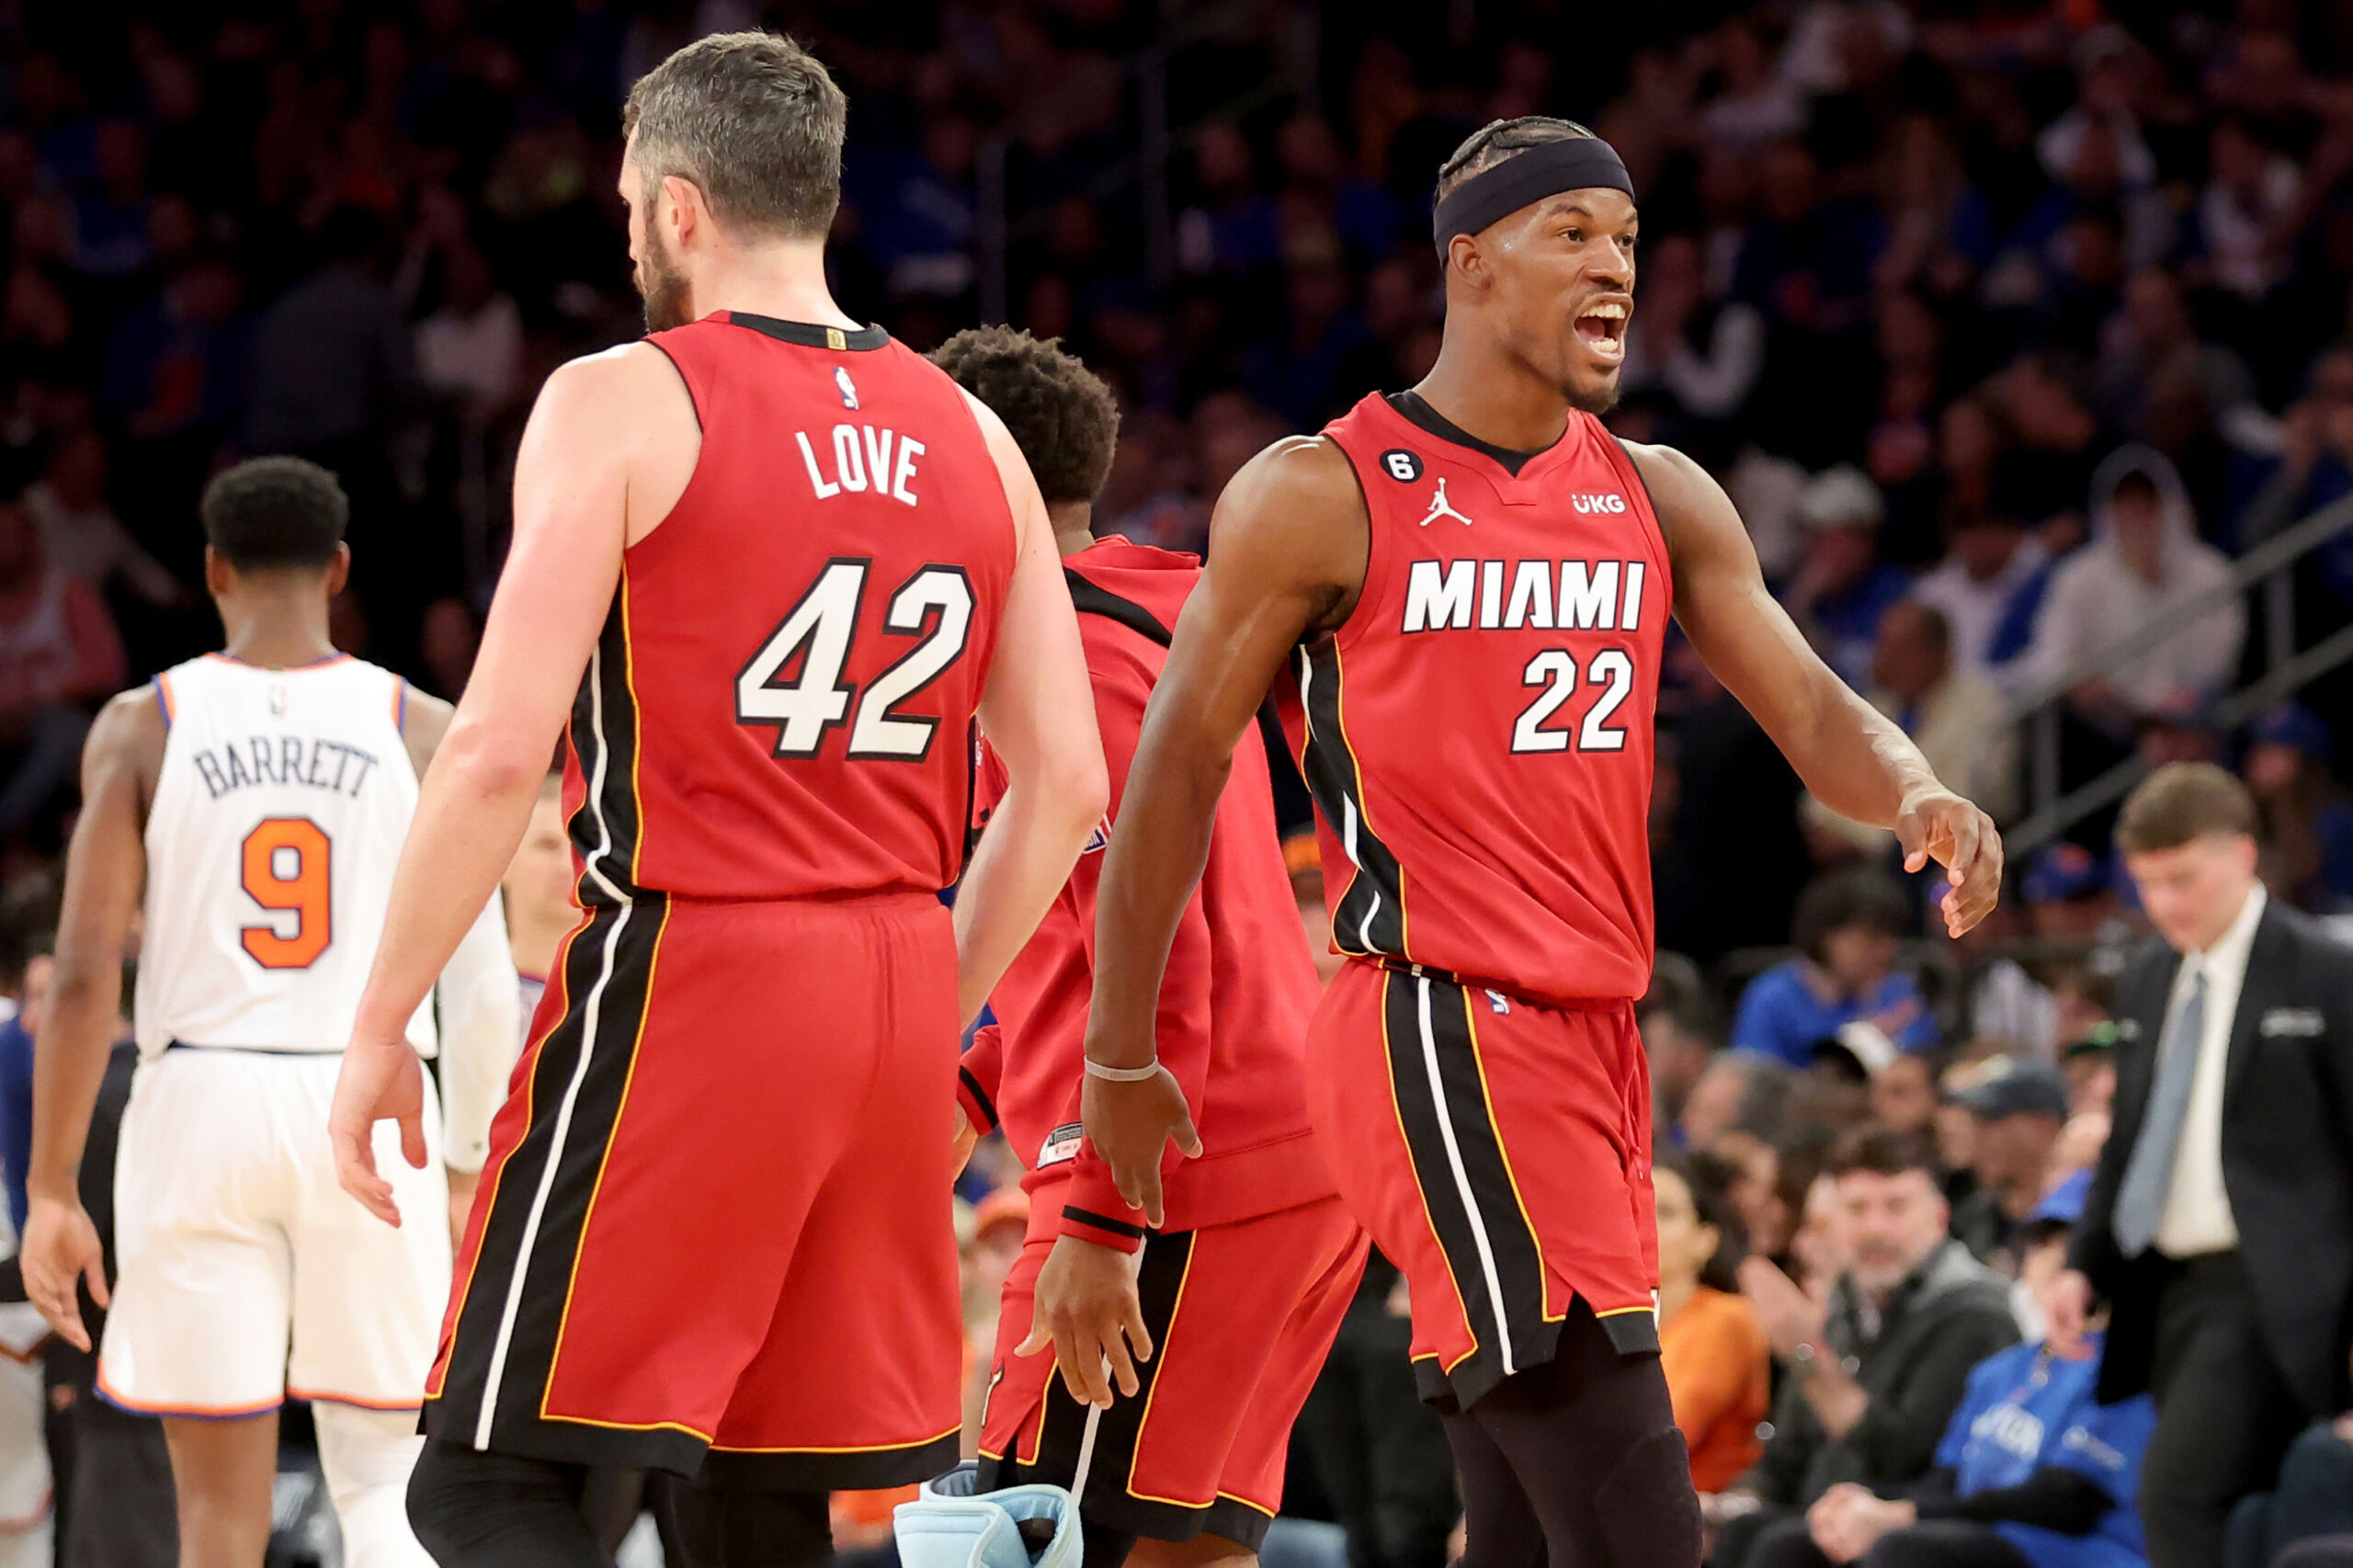 Confidence keeps carrying Jimmy Butler, and the Miami Heat hope it